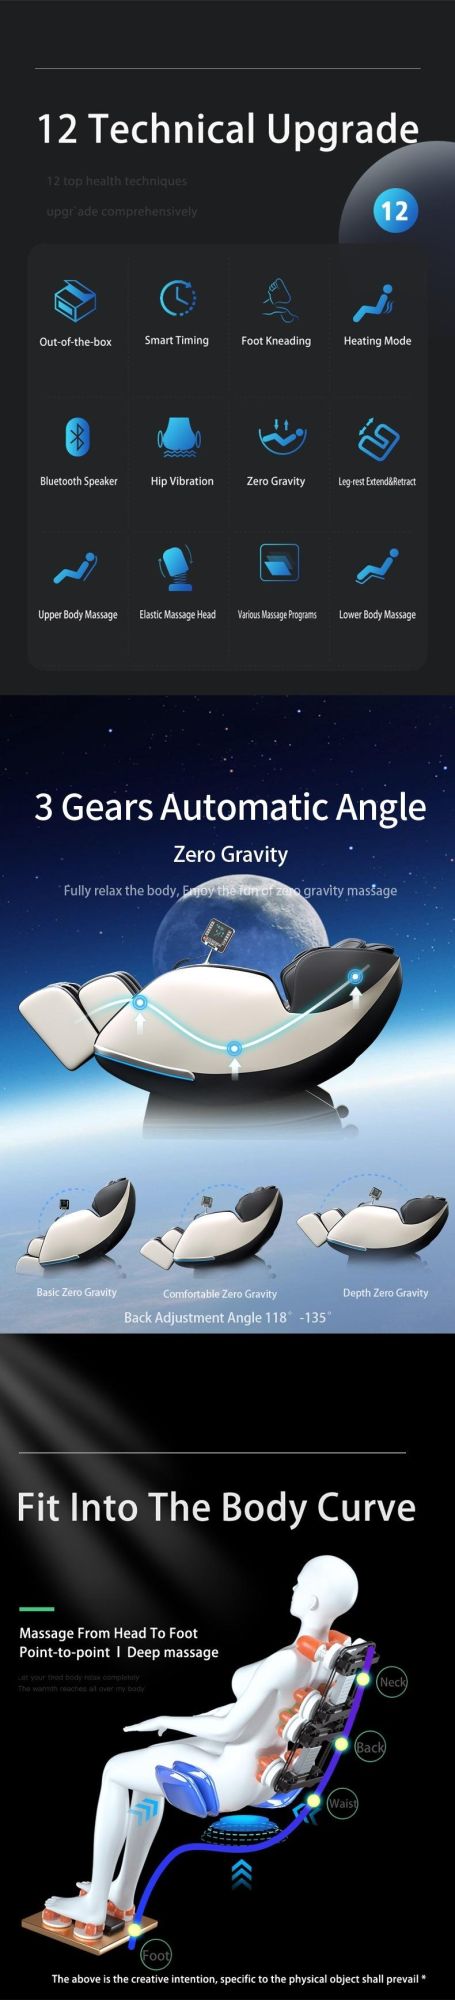 Massage Tools and Equipment Zero Gravity 3D Massage Chair for Body